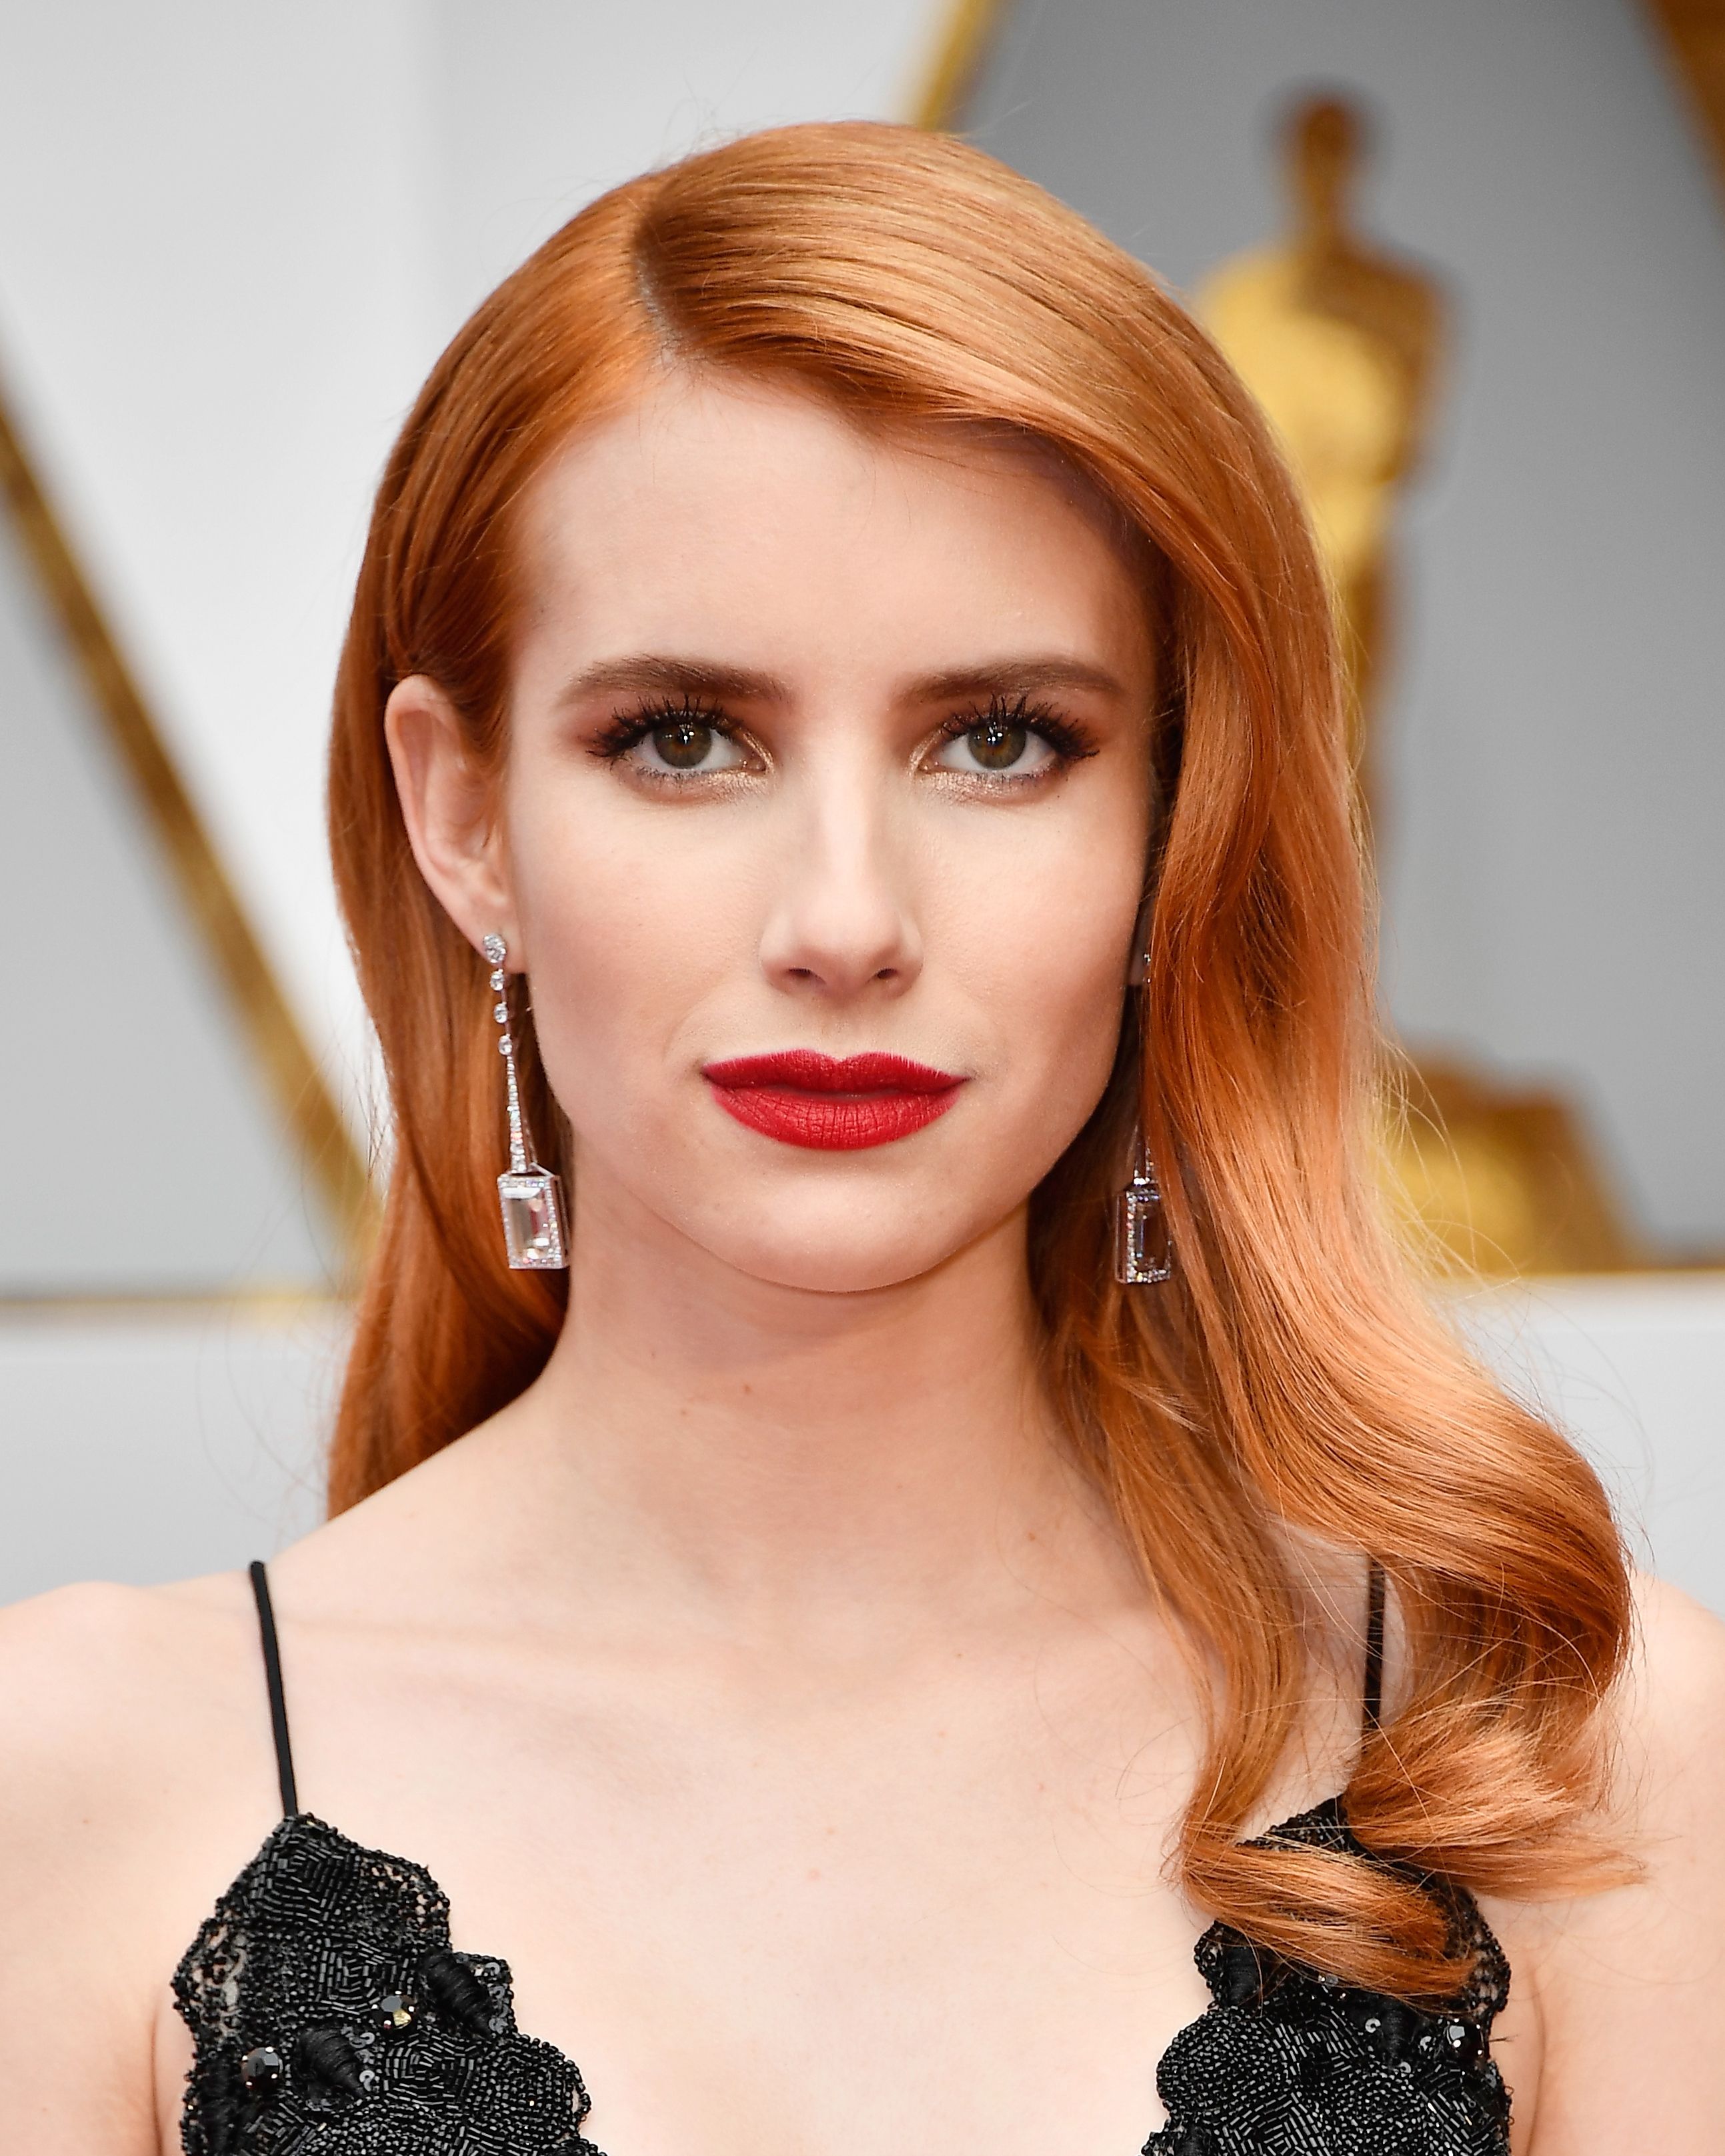 Hair Colour Ideas - 33 Celebrity Redheads To Inspire Your Next Trip The Salon